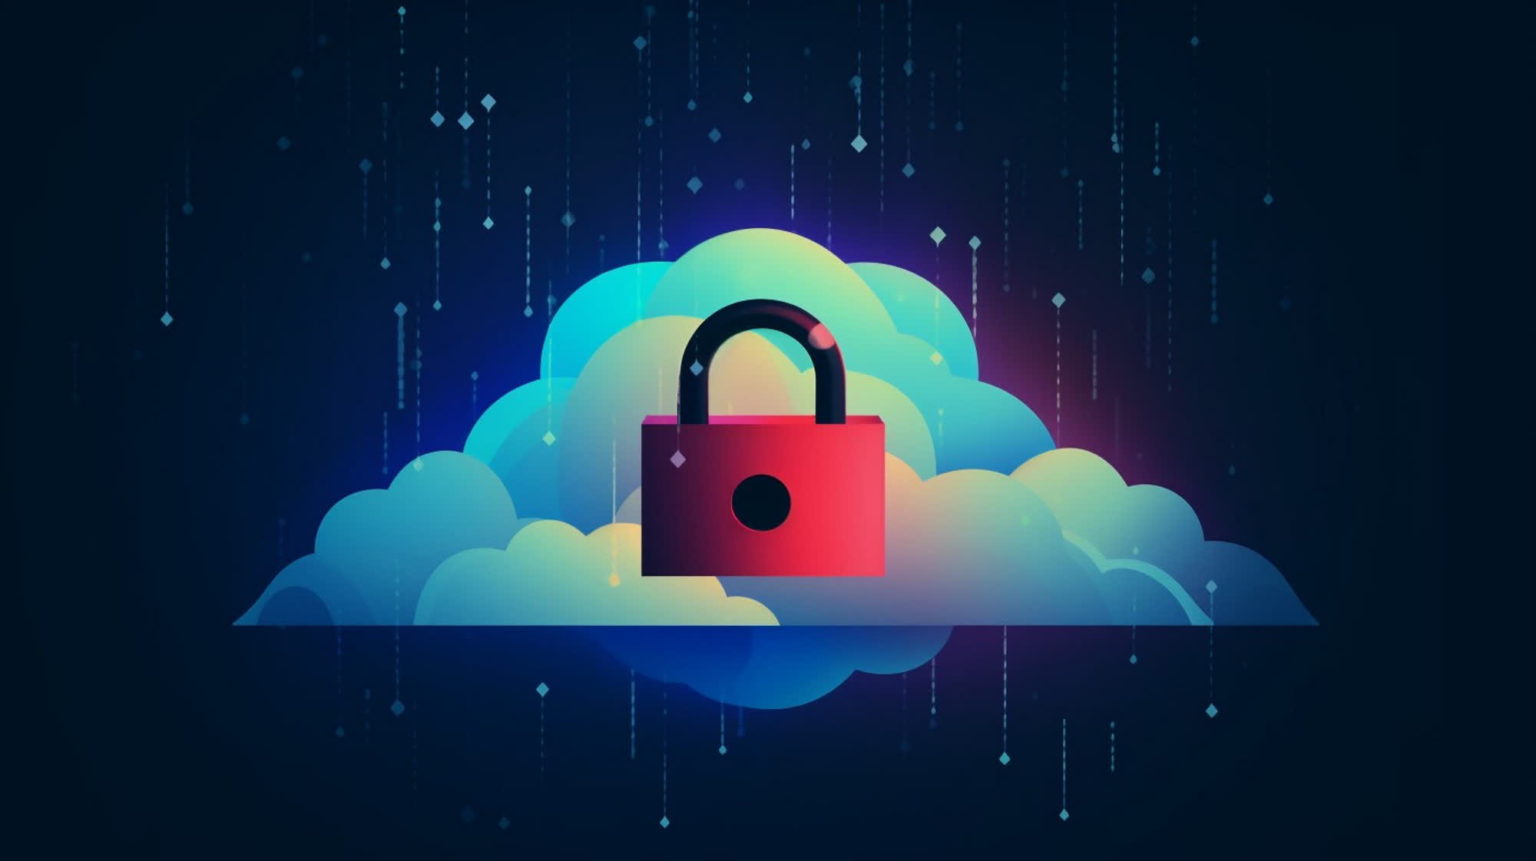 A critical vulnerability in ownCloud servers is being exploited en masse